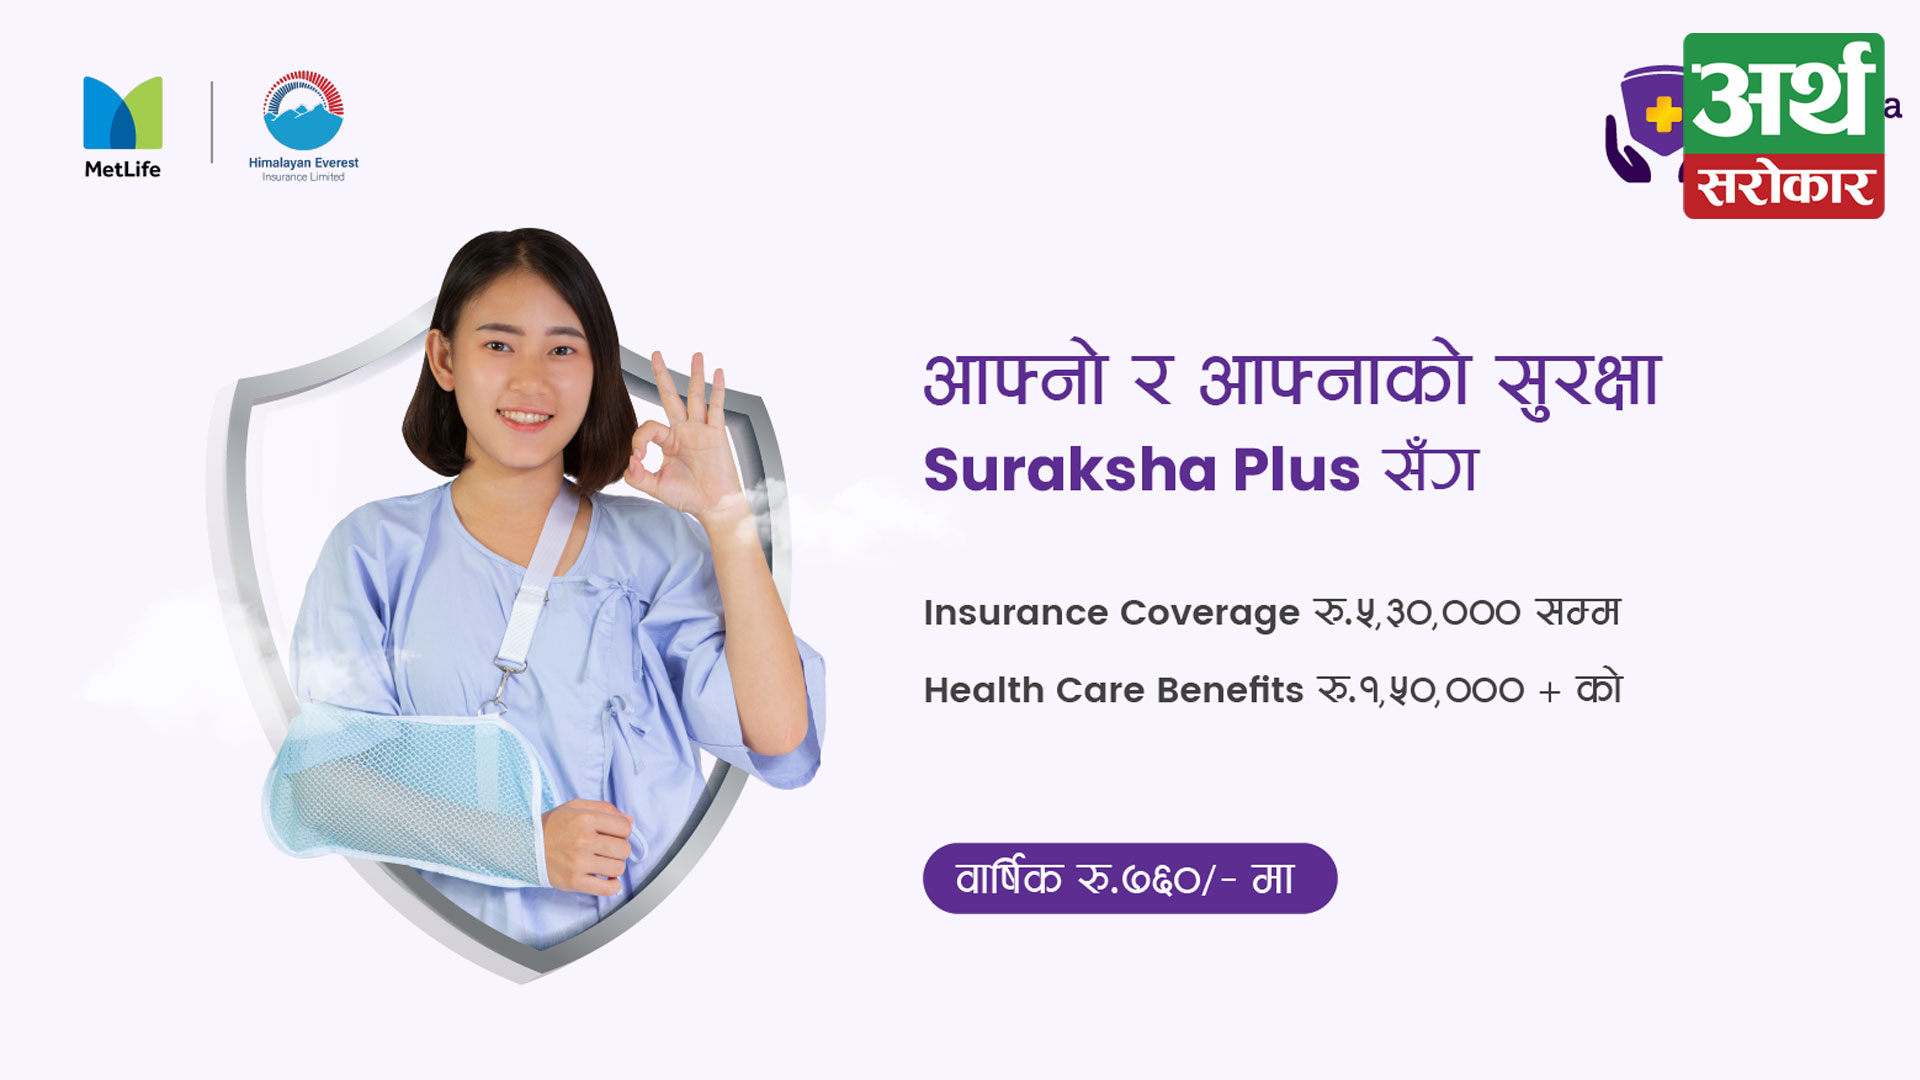 Khalti launches ‘Suraksha Plus’ with Rs. 5,30,000 in insurance coverage and additional health care benefits